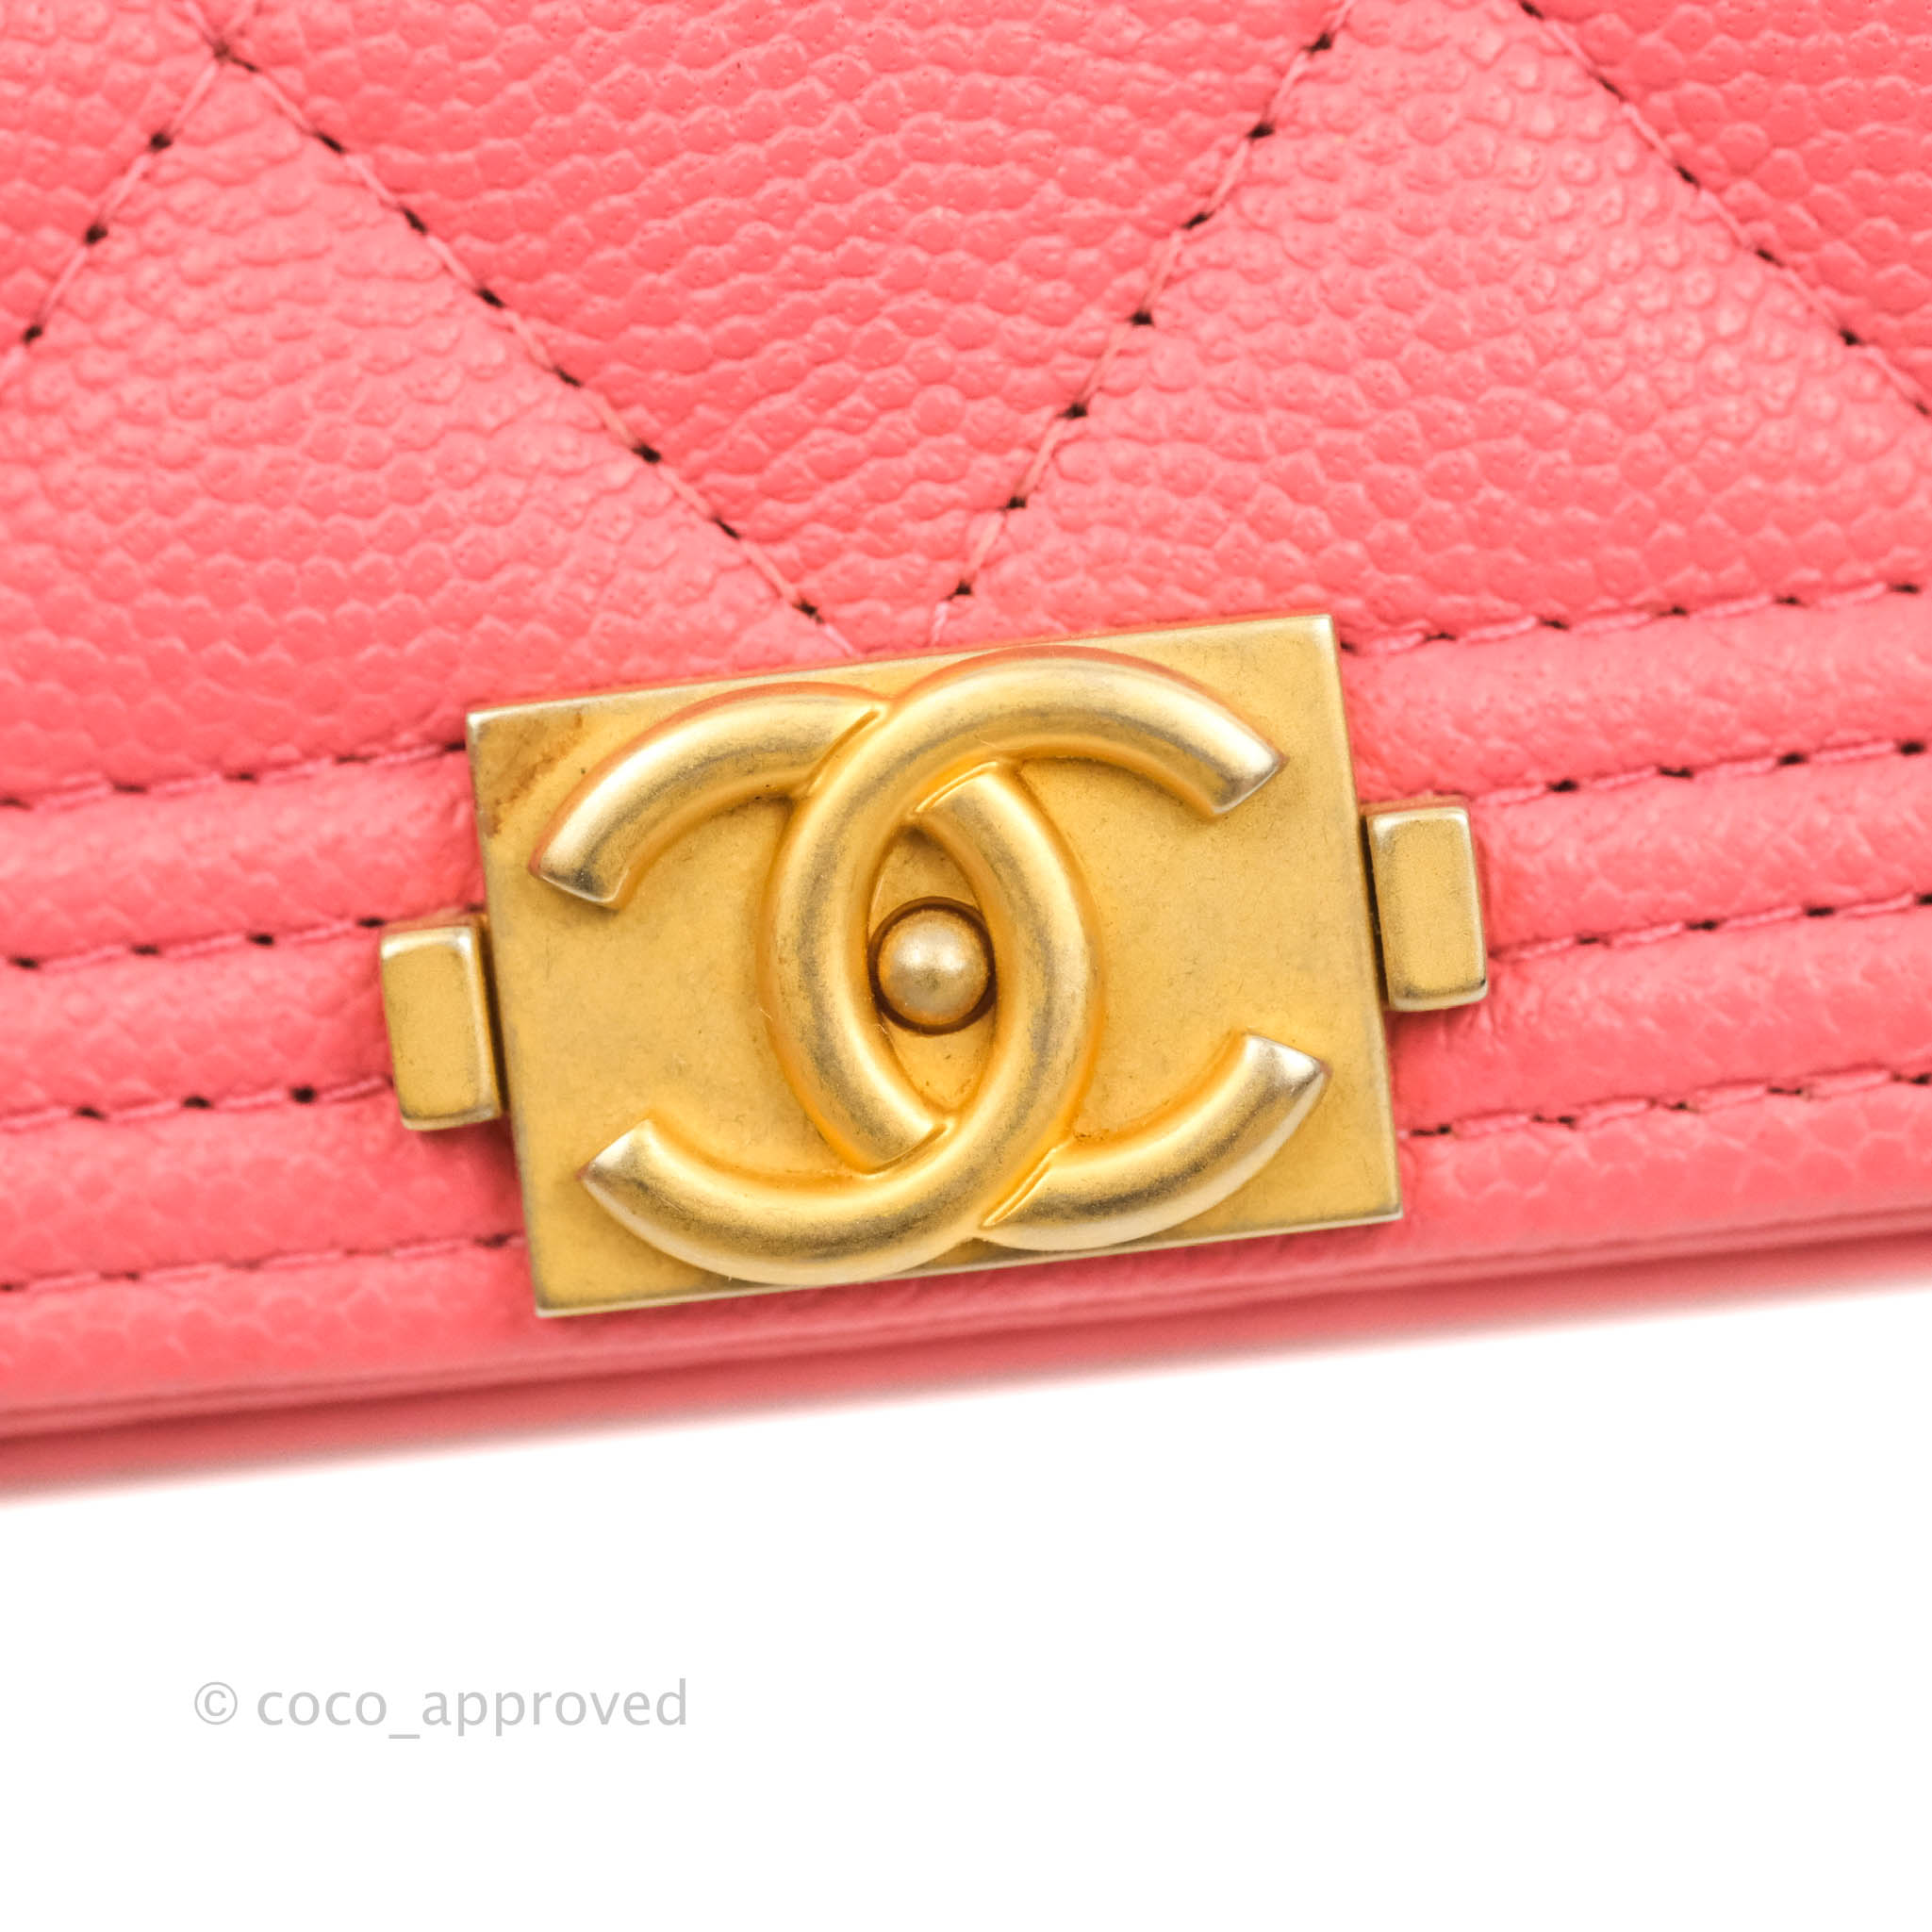 Chanel Quilted Boy Wallet on Chain WOC Pink Caviar Aged Gold